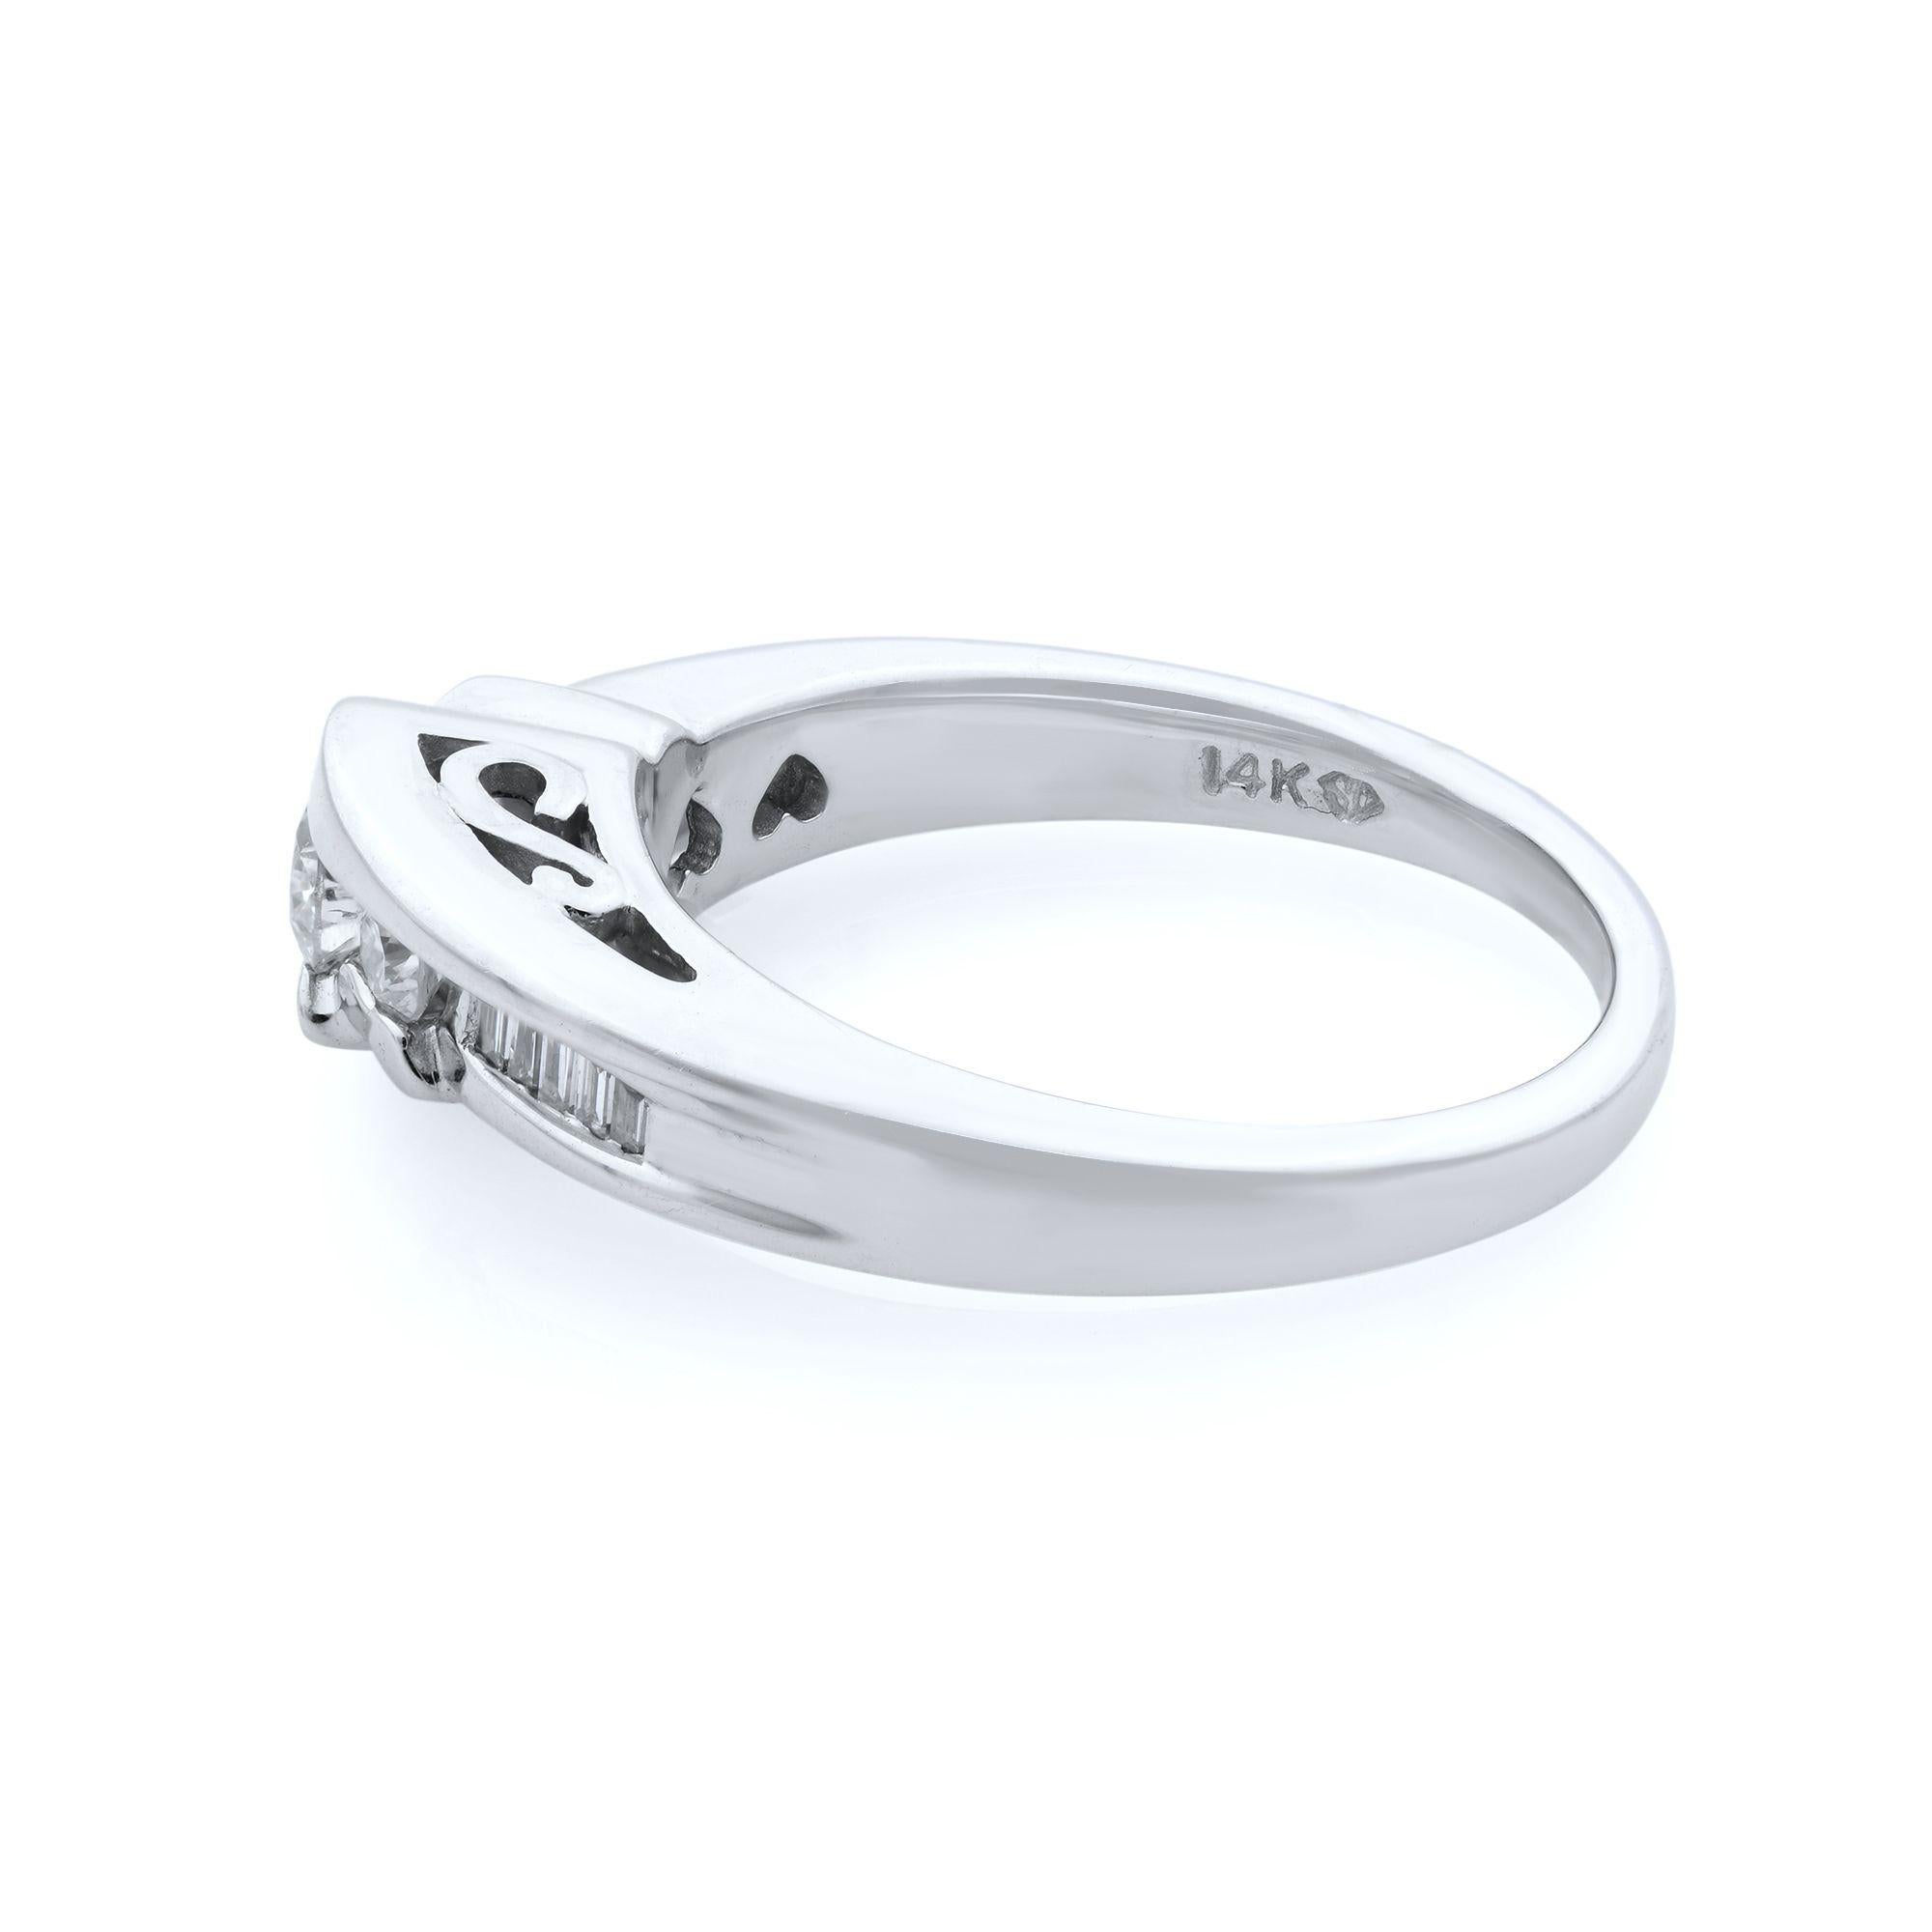 This engagement ring features a low, half-bezel setting with a flared band. Round cut center stone and two round cuts on each side, shank channel set with tiny baguettes. The ring has a spectacular little engraving on the sides of the piece. Total